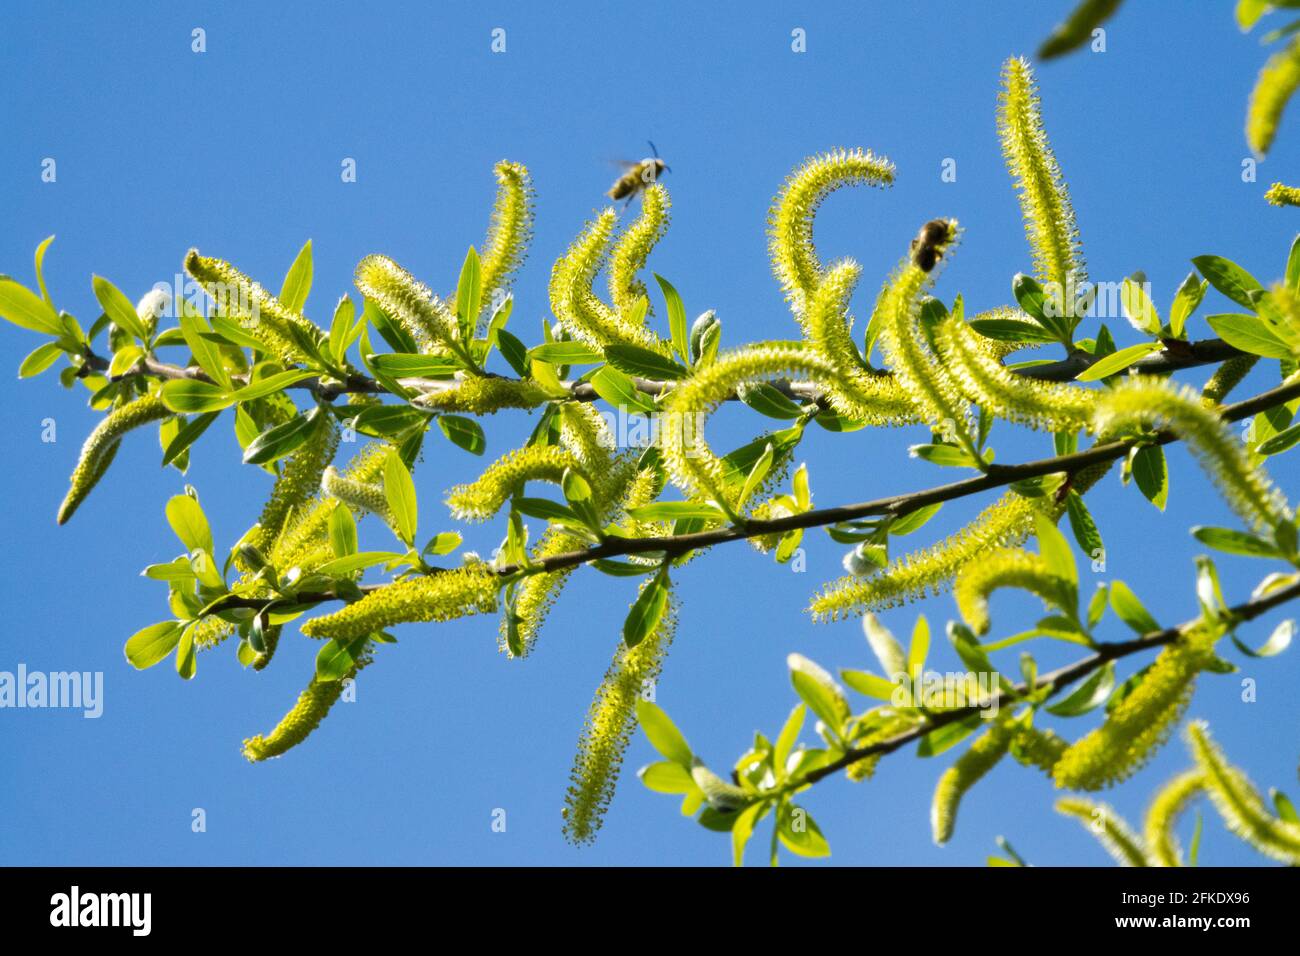 Salix fragilis willow Catkins Spring Pollen Willow Branches Crack willow Brittle willow Aments Against Blue sky Salix Flowering Springtime Bees blooms Stock Photo